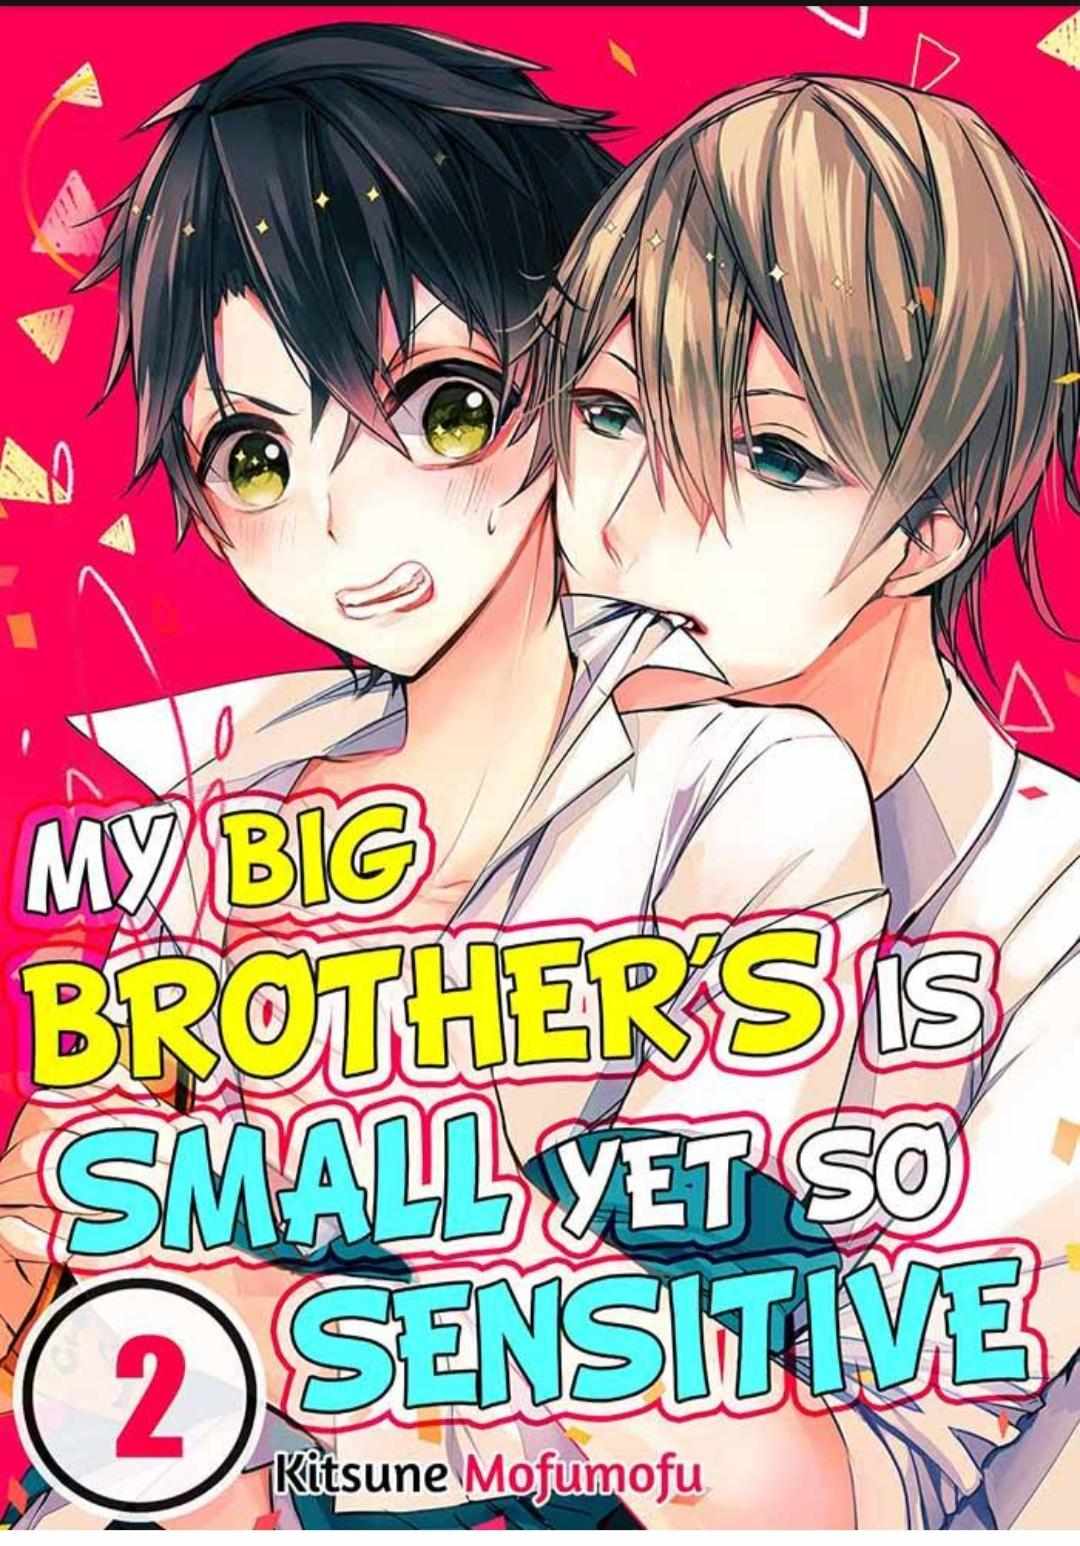 My Big Brother's is Small Yet So Sensitive - chapter 5 - #2